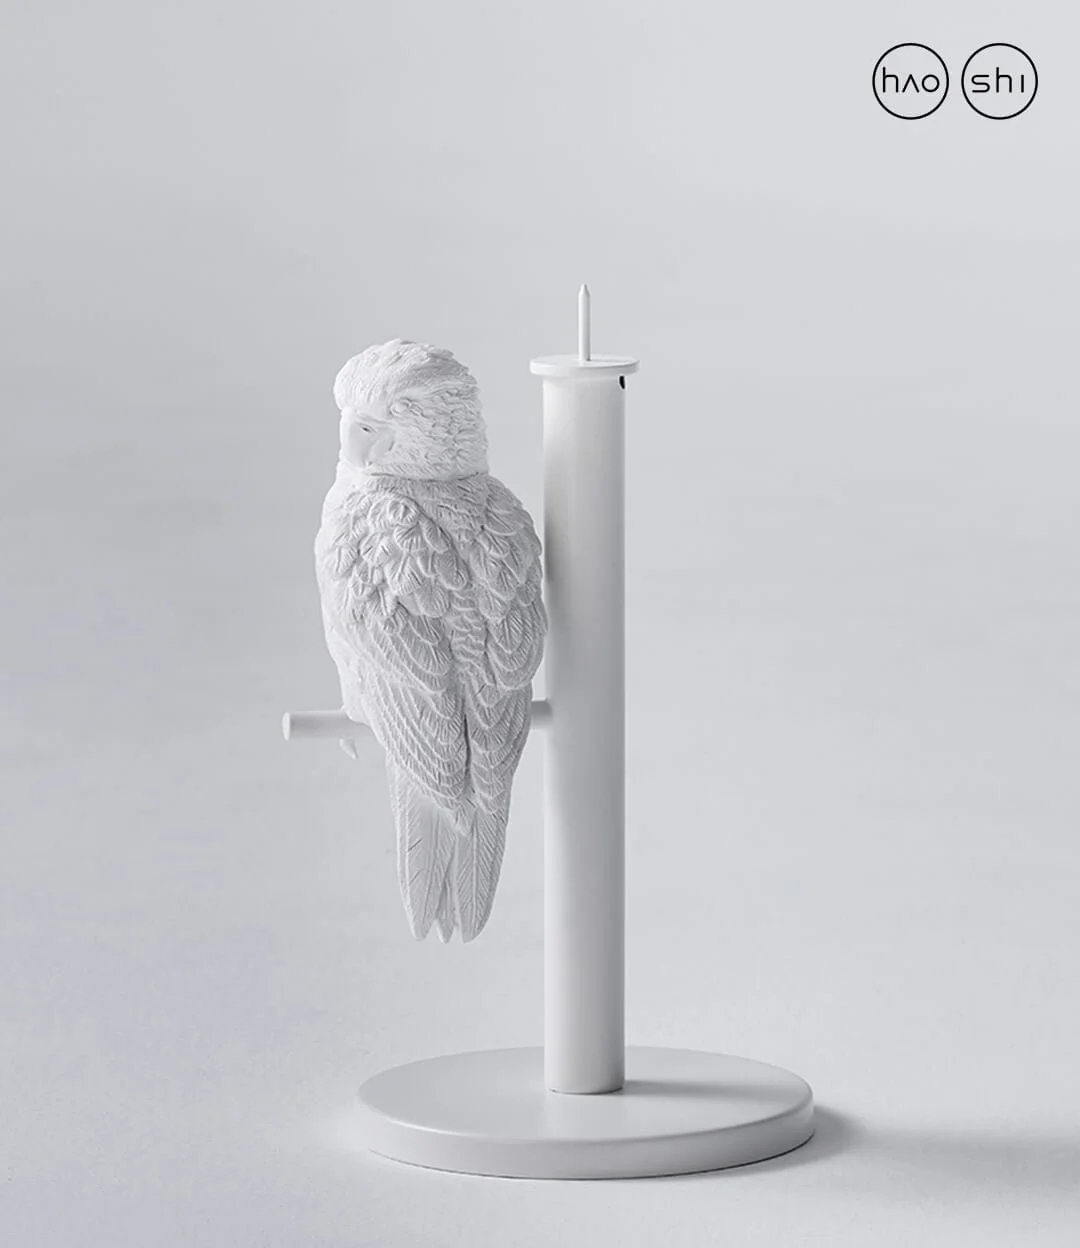 Parrot X CANDLE HOLDER – Single by Haoshi 